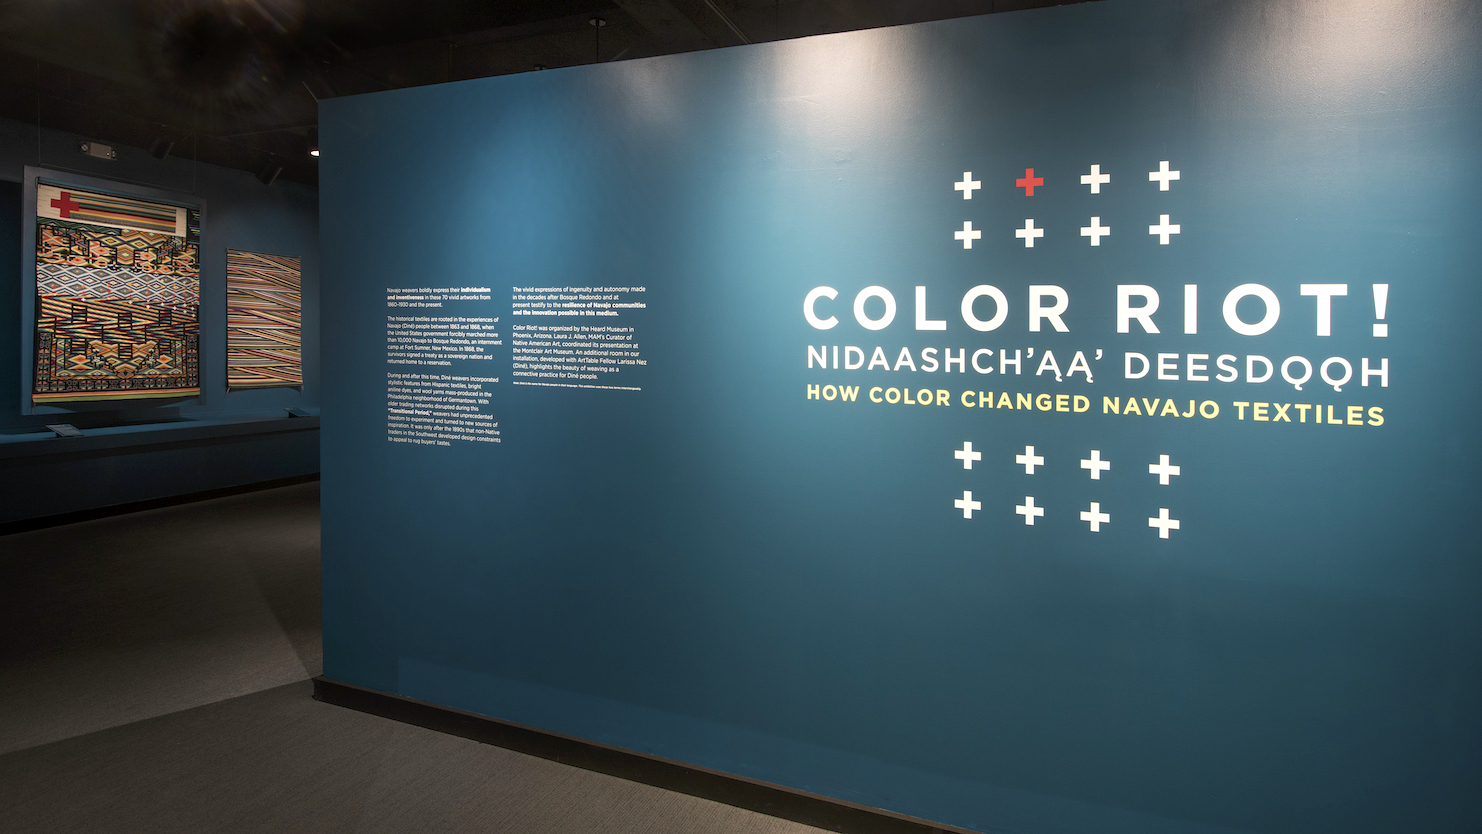 View of the color riot exhibition.